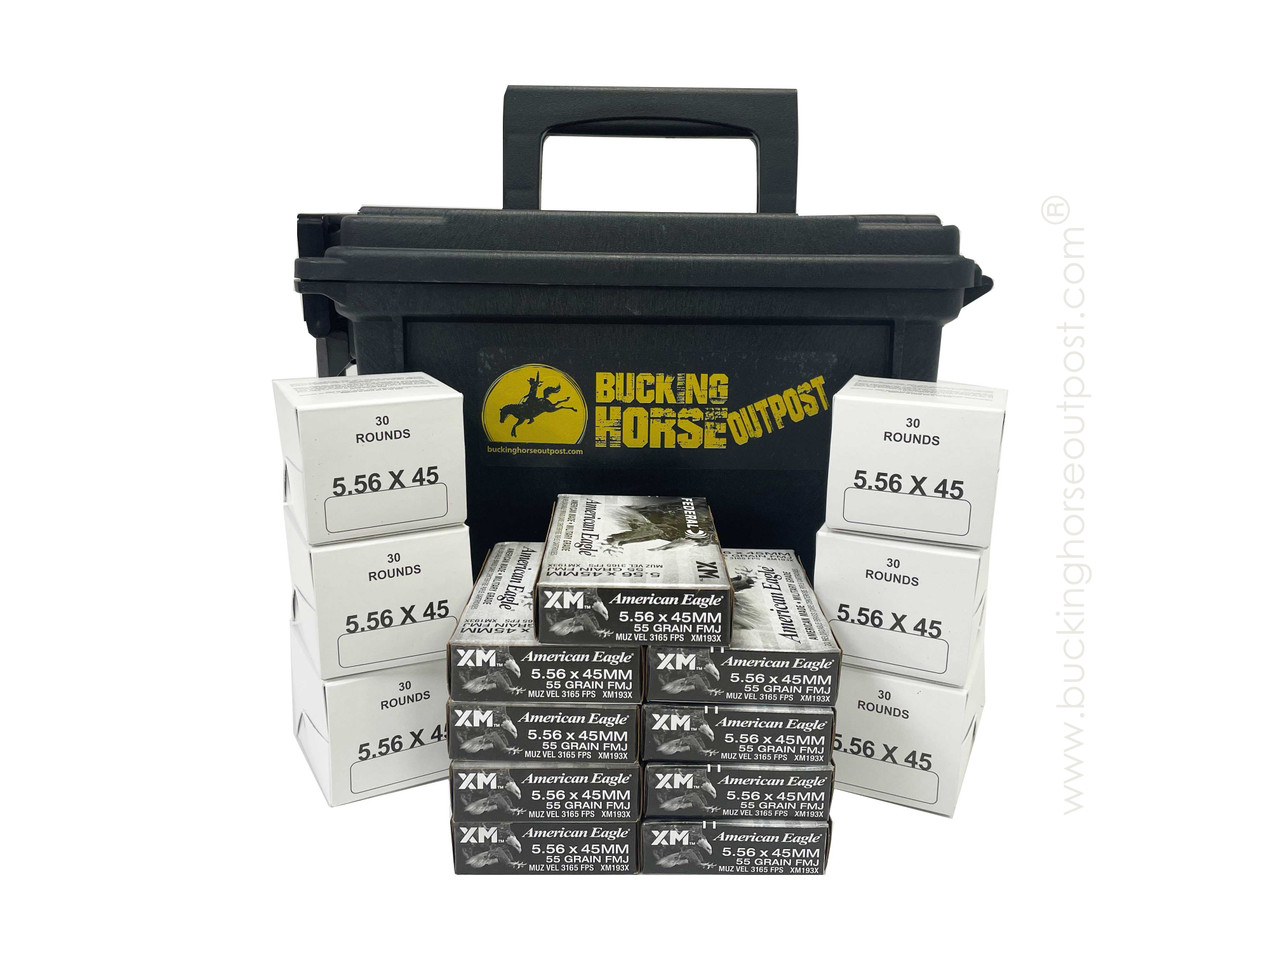 Battle Box Ammo Can - 180rds Winchester M855 5.56mm 62 Grain SS109 & 180rds Federal American Eagle XM193X 5.56mm 55 Grain FMJBT - FREE SHIPPING on orders over $125